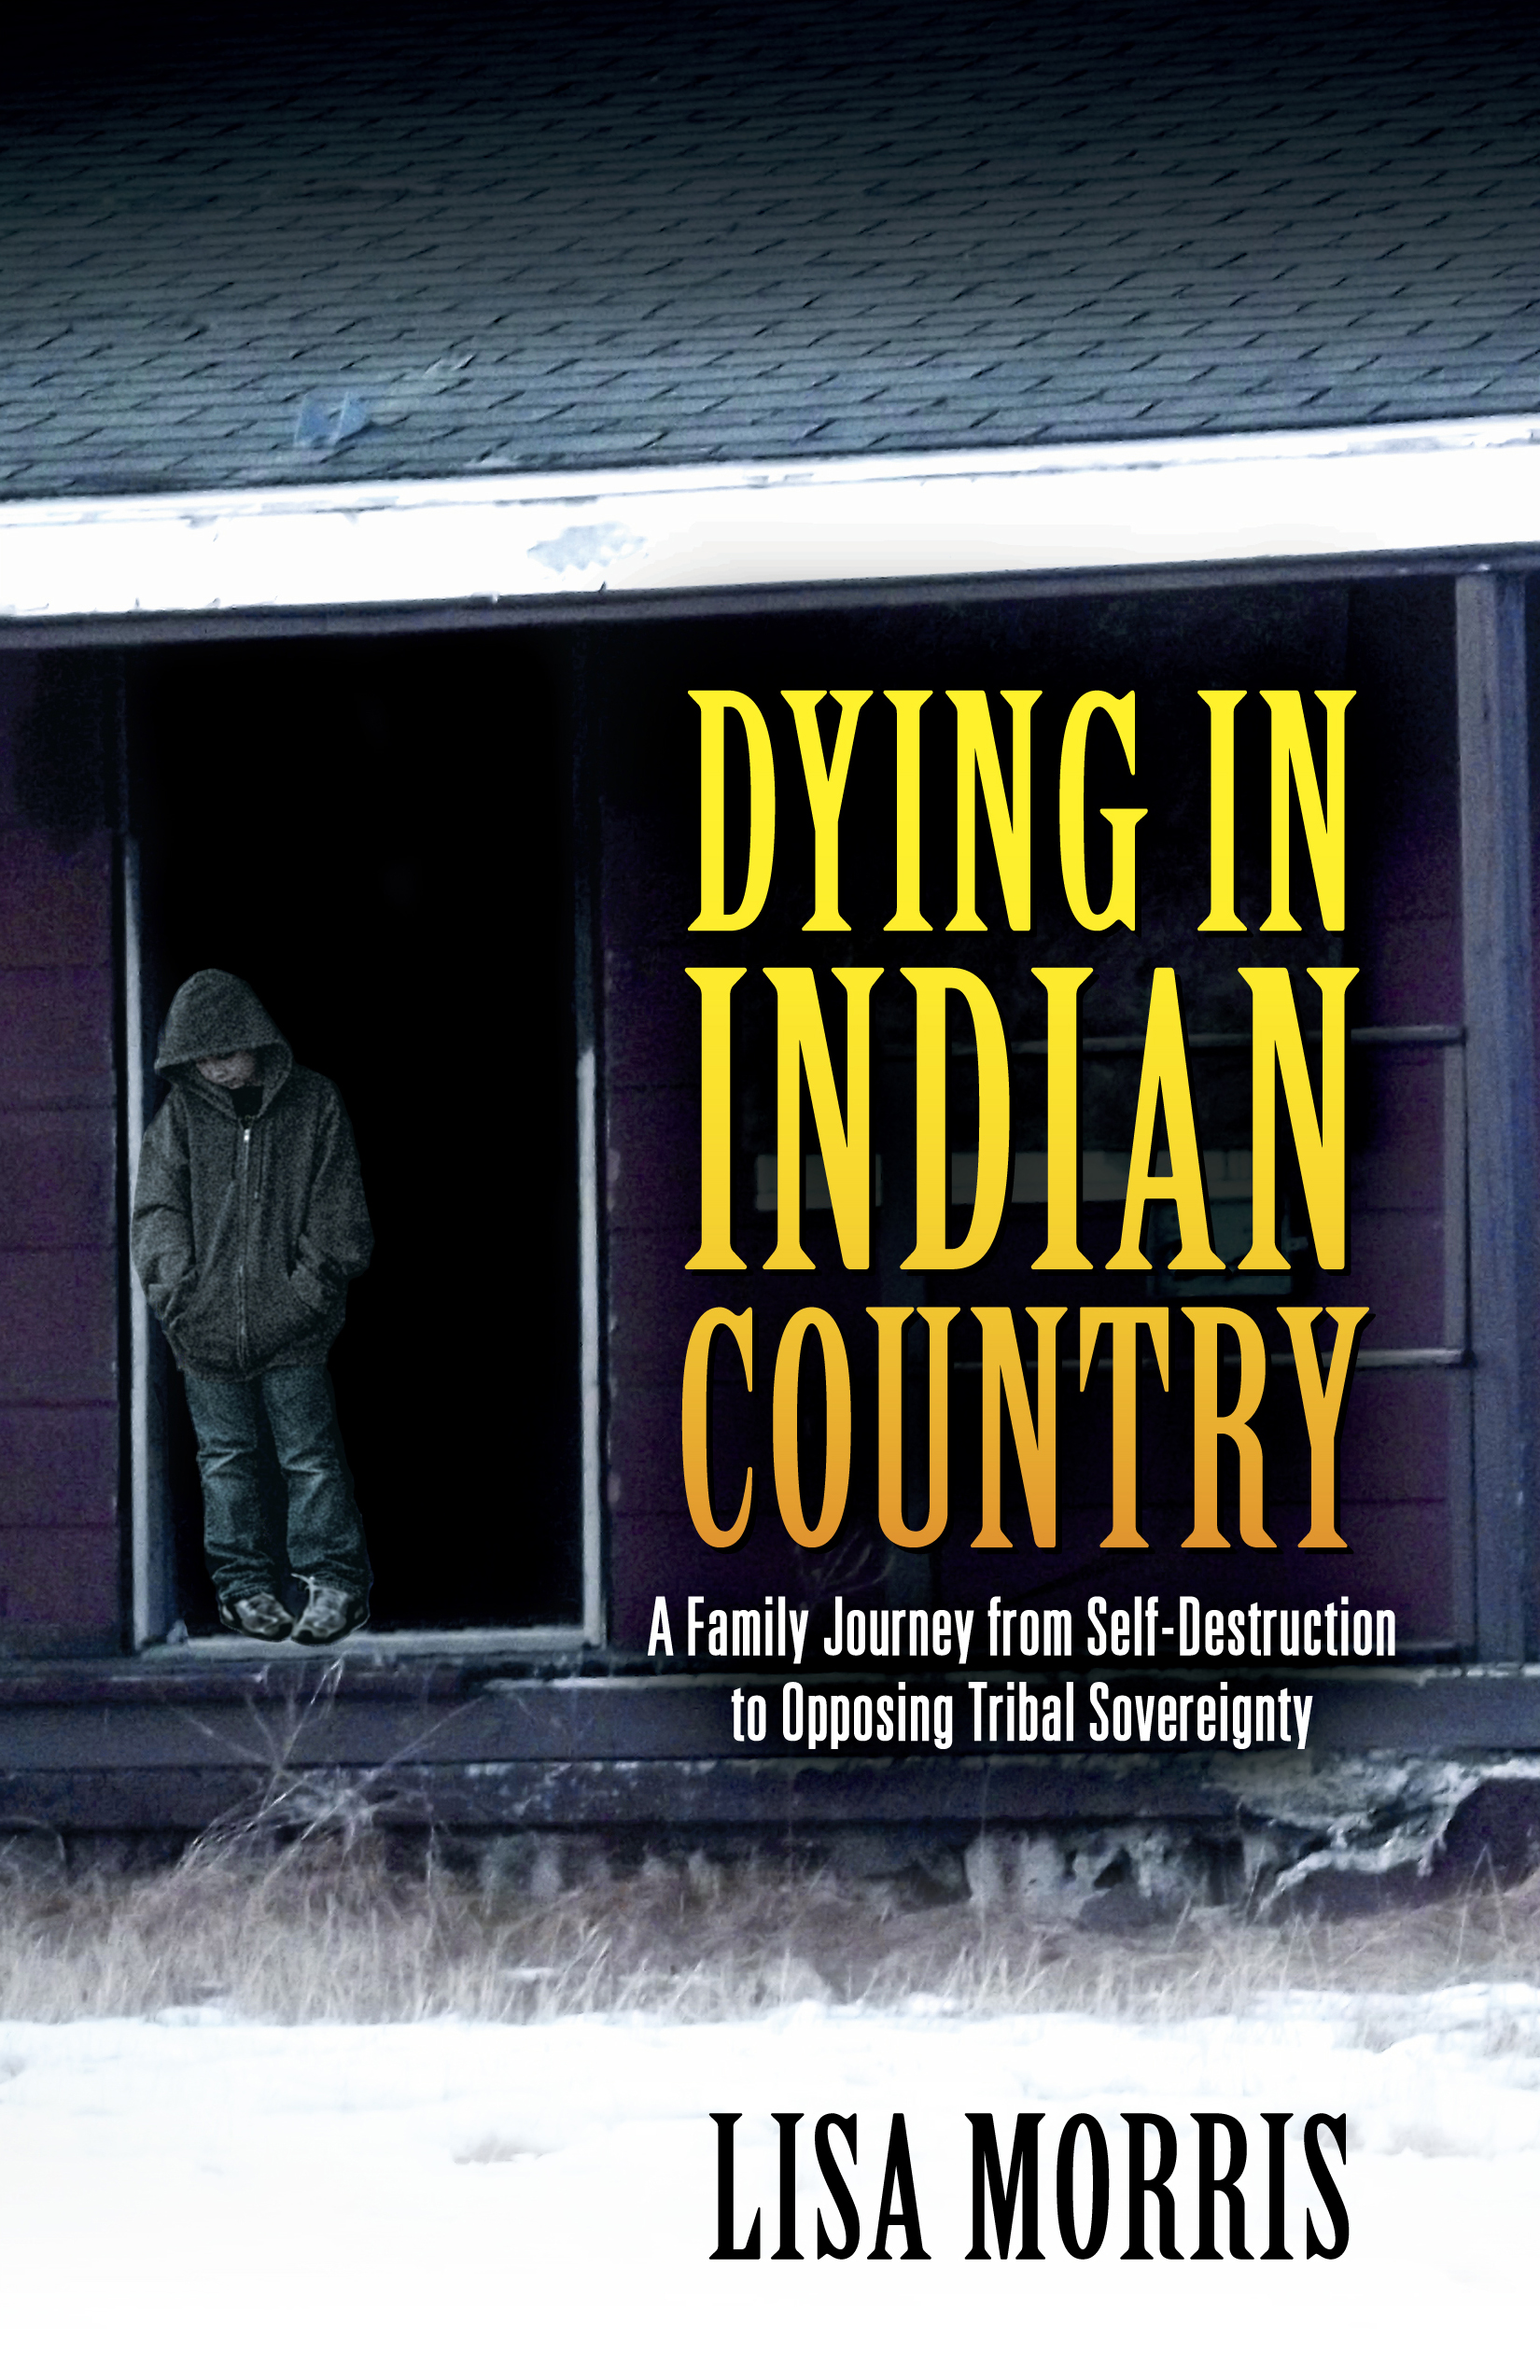 Dying in Indian Country